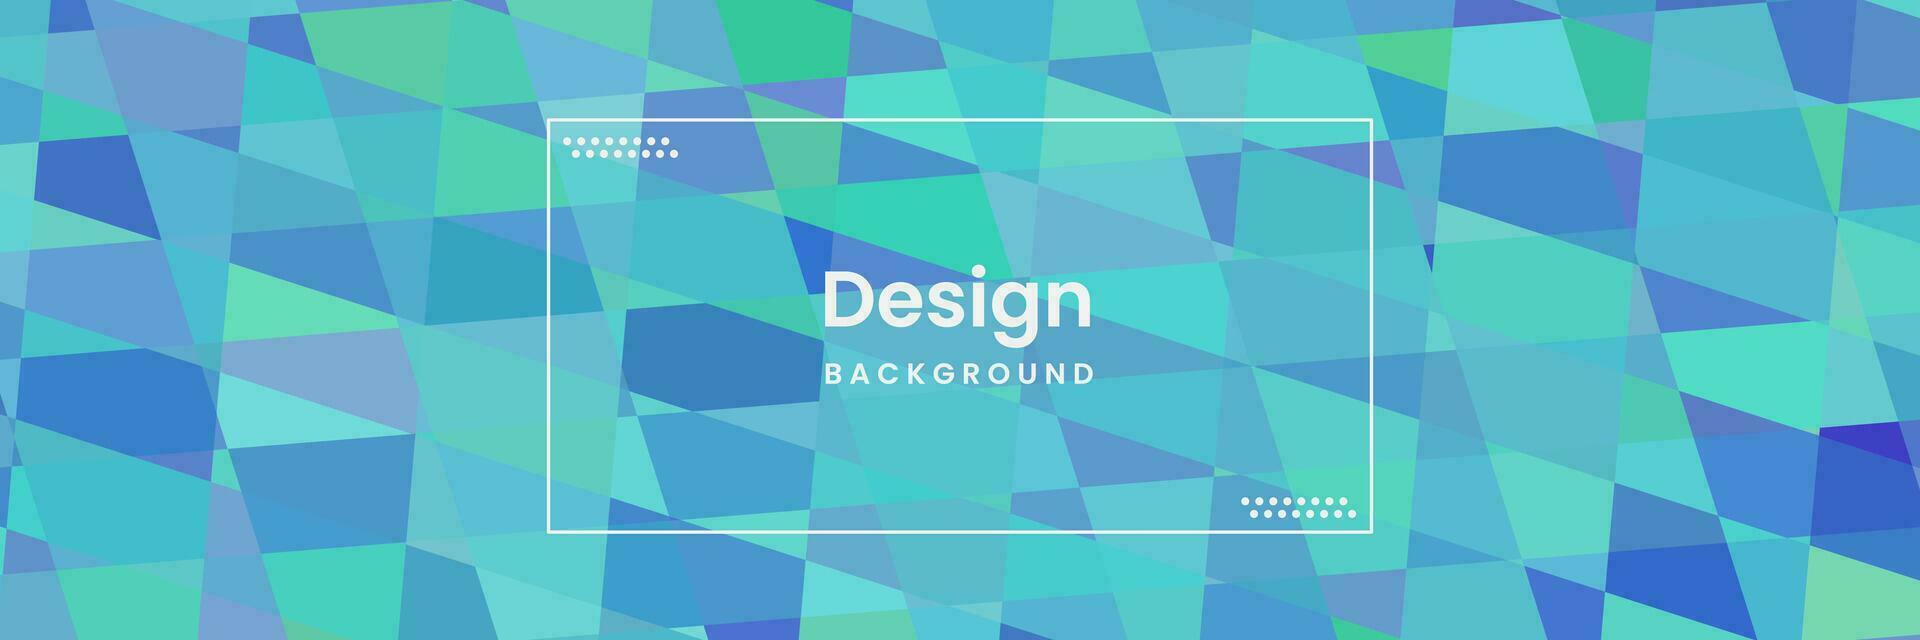 abstract geometric background with vibrant color vector